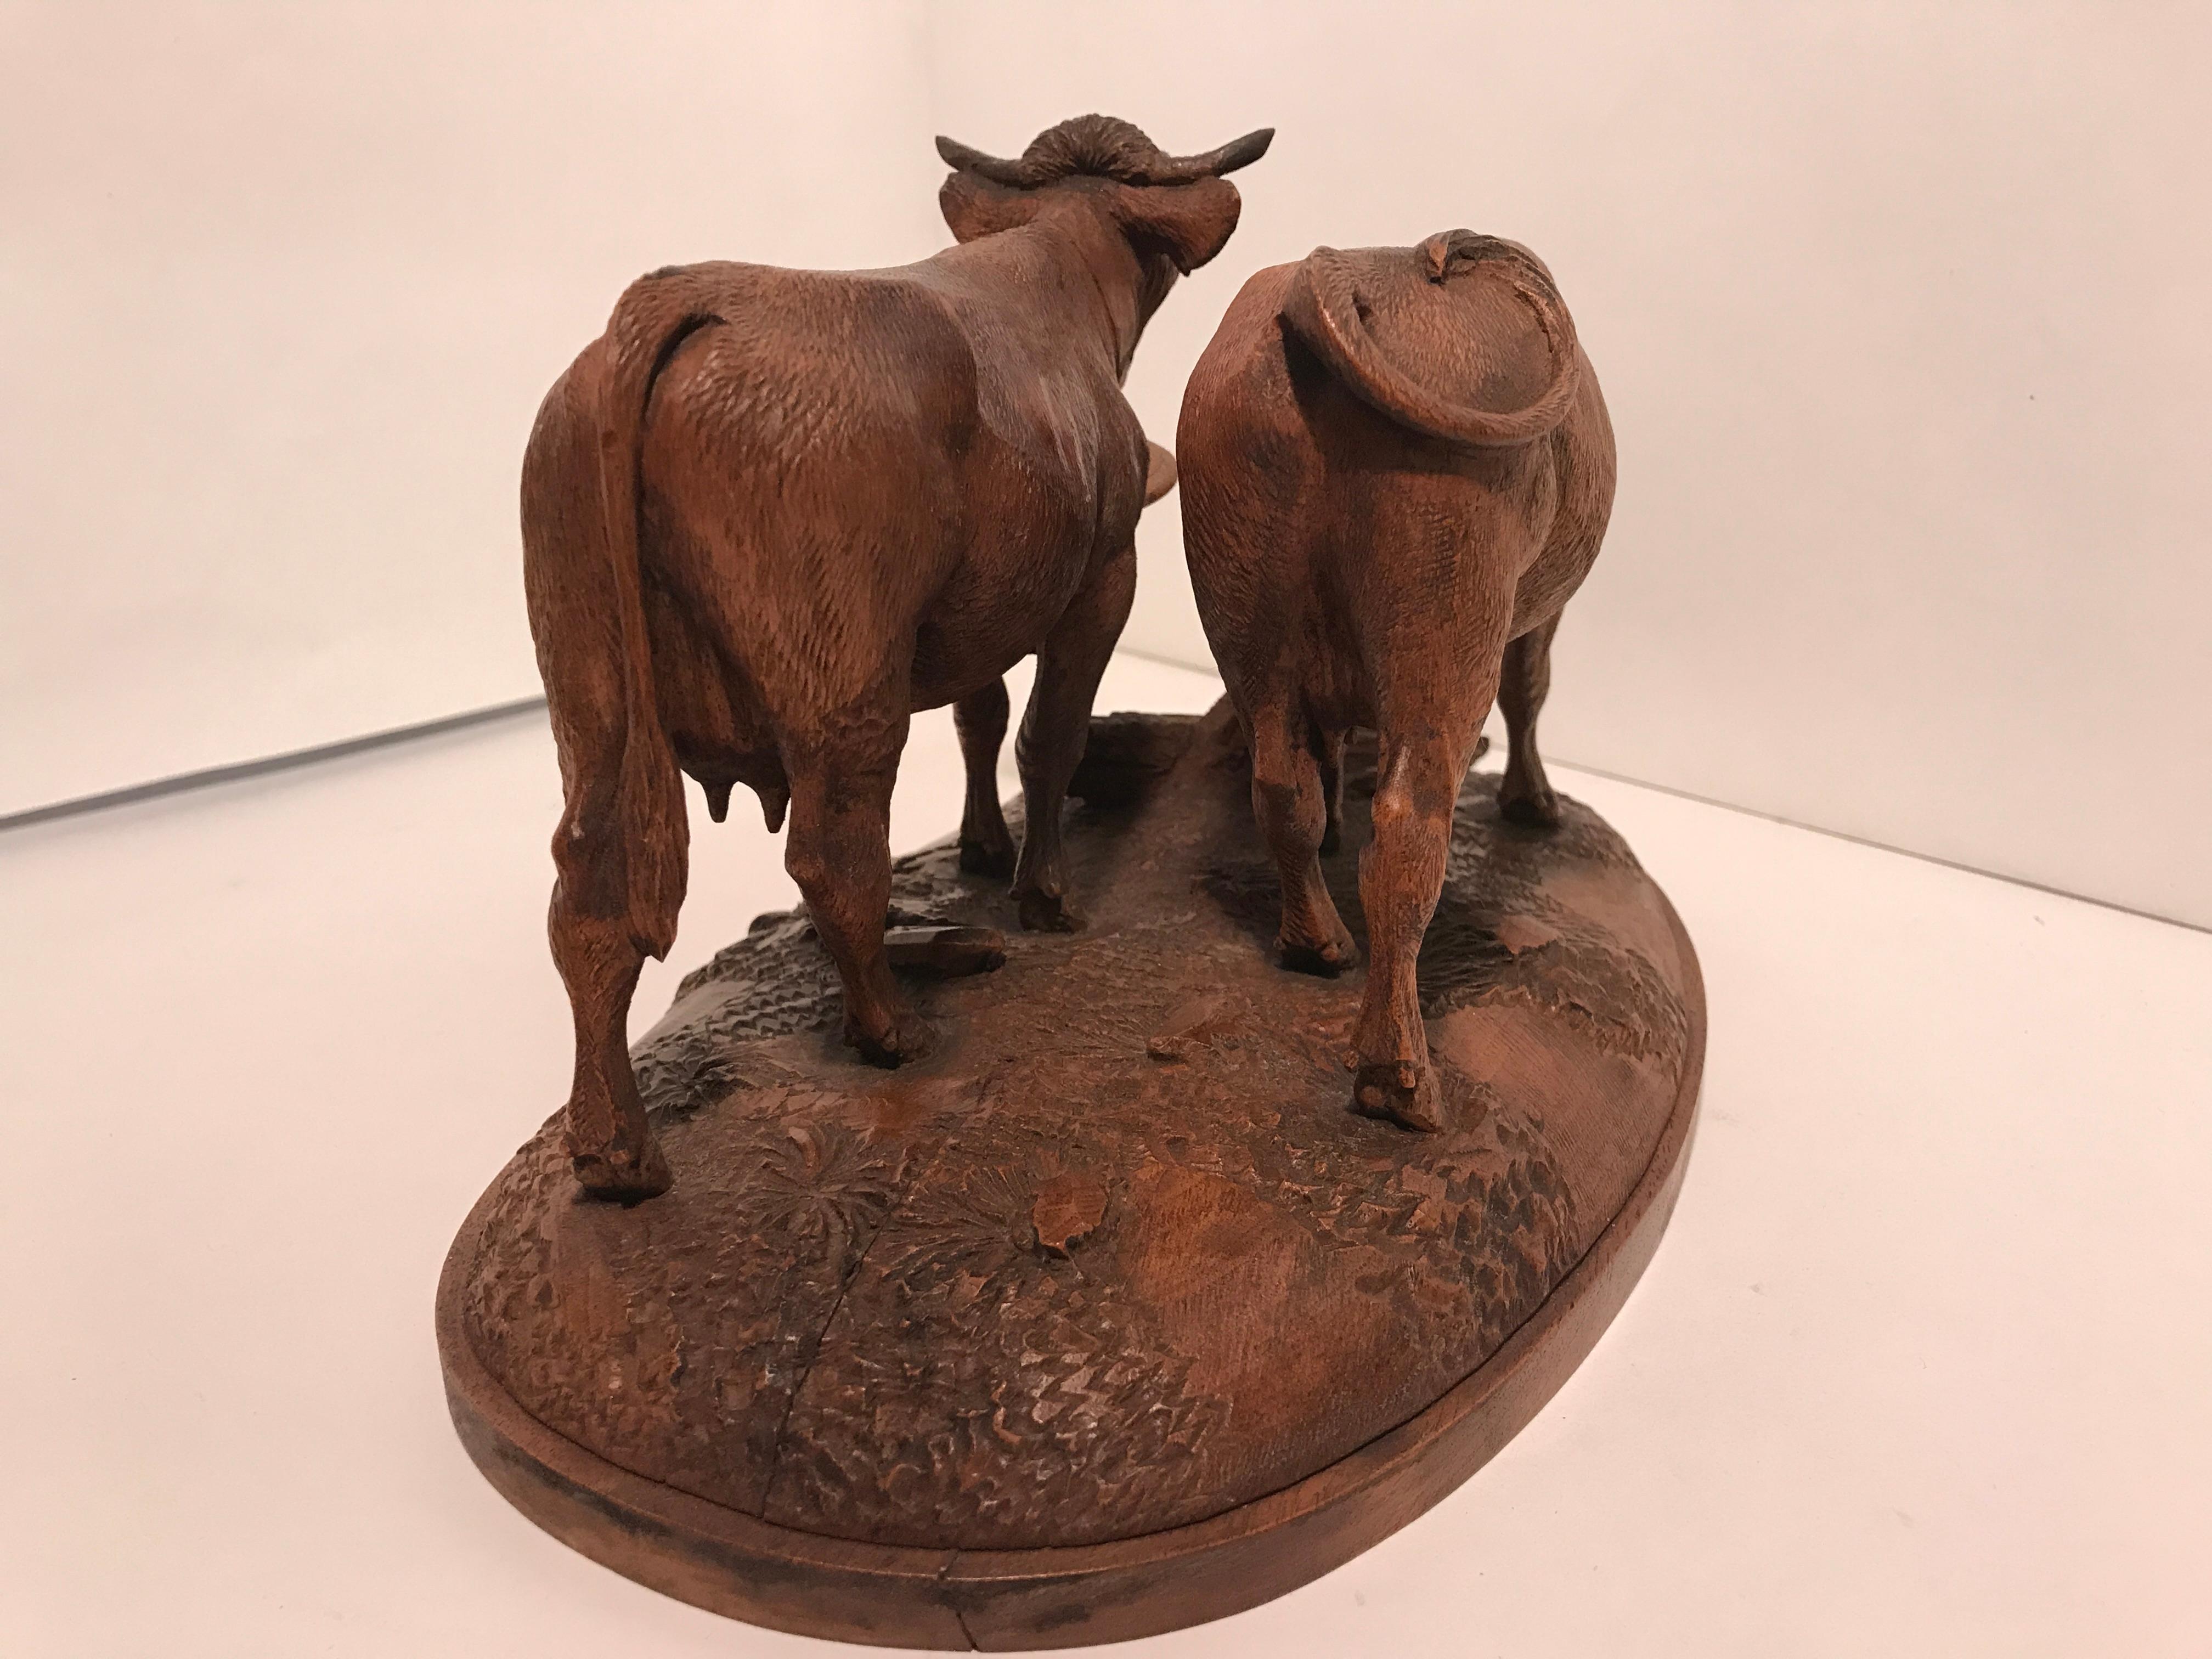 Black Forest hand carved walnut sculpture of two milking cows, one wearing a bell around its neck. Typical image of Swiss cows. Very fine realistic carving in excellent condition. Original label on the bottom reads:

Magasin Suisse
C.